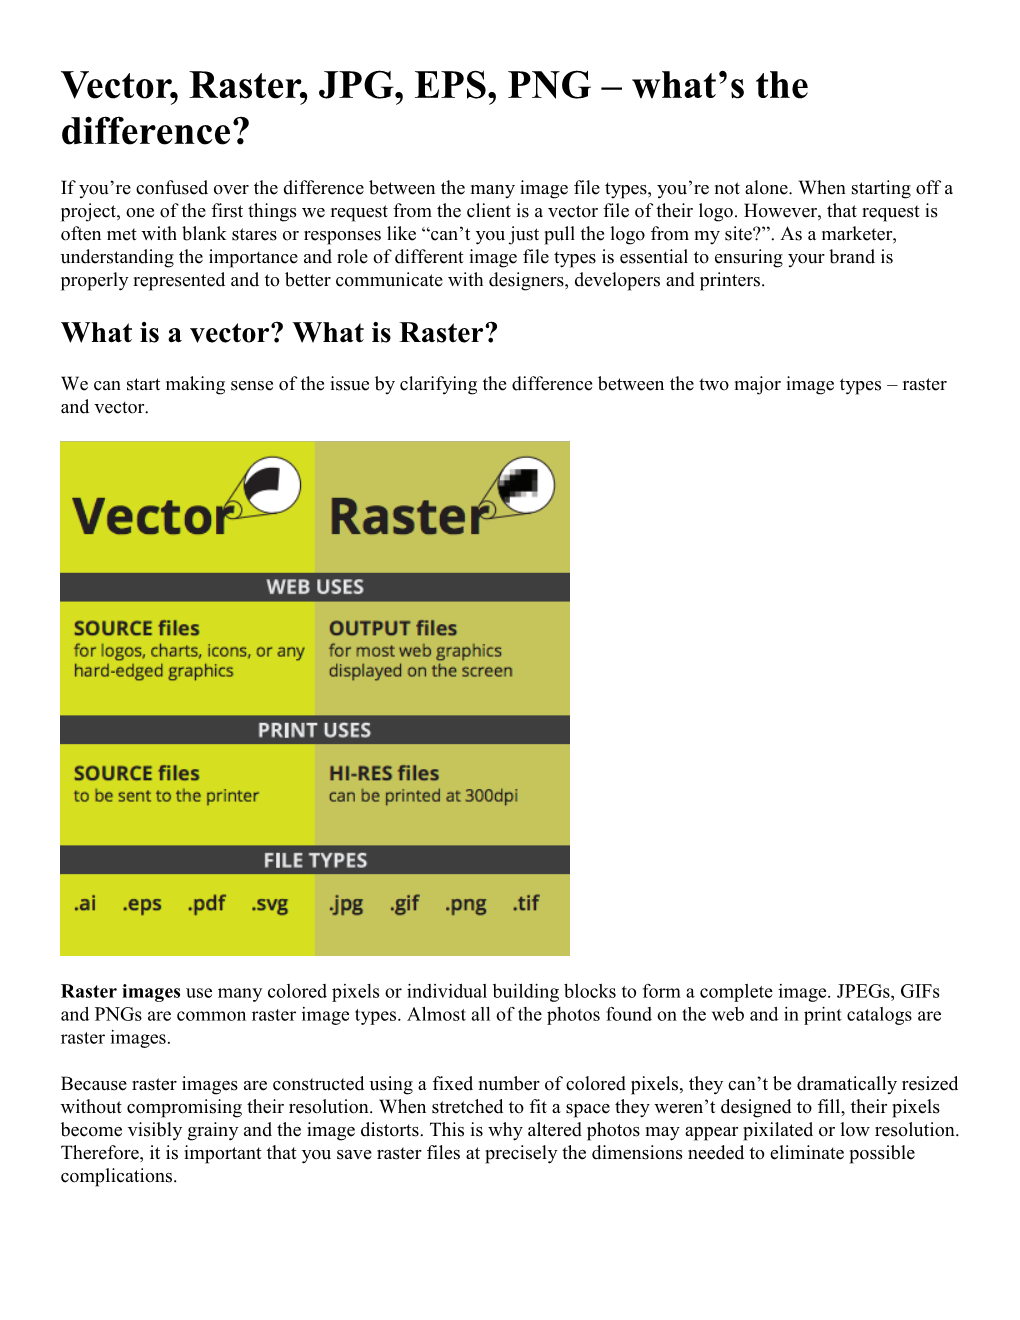 Vector, Raster, JPG, EPS, PNG – What's the Difference?